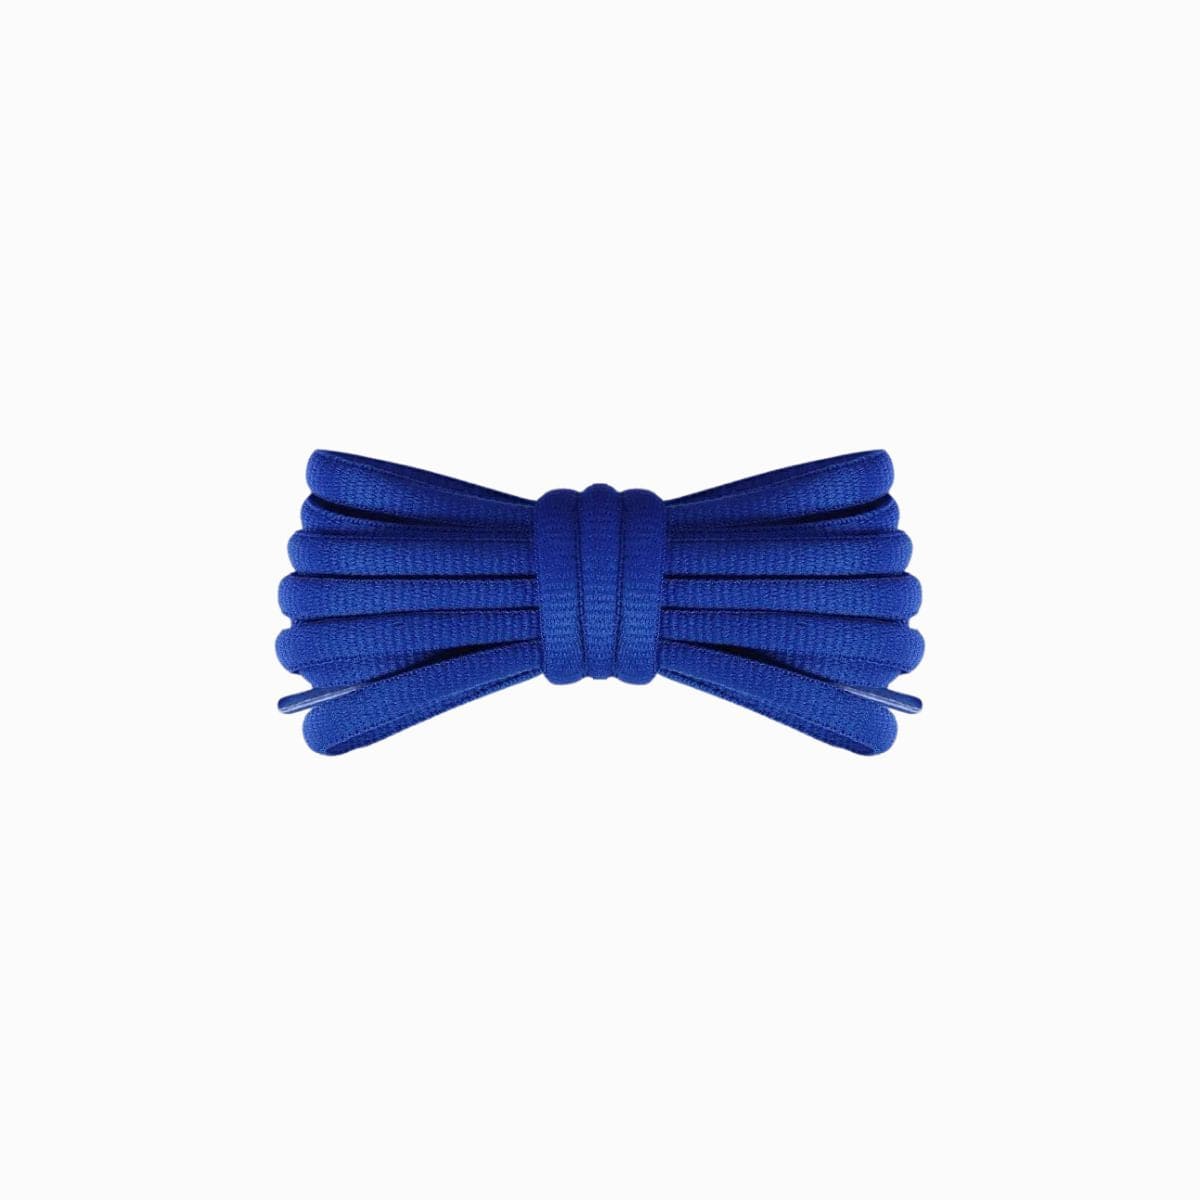 Royal Blue Replacement Adidas Shoe Laces for Adidas Spezial Sneakers by Kicks Shoelaces